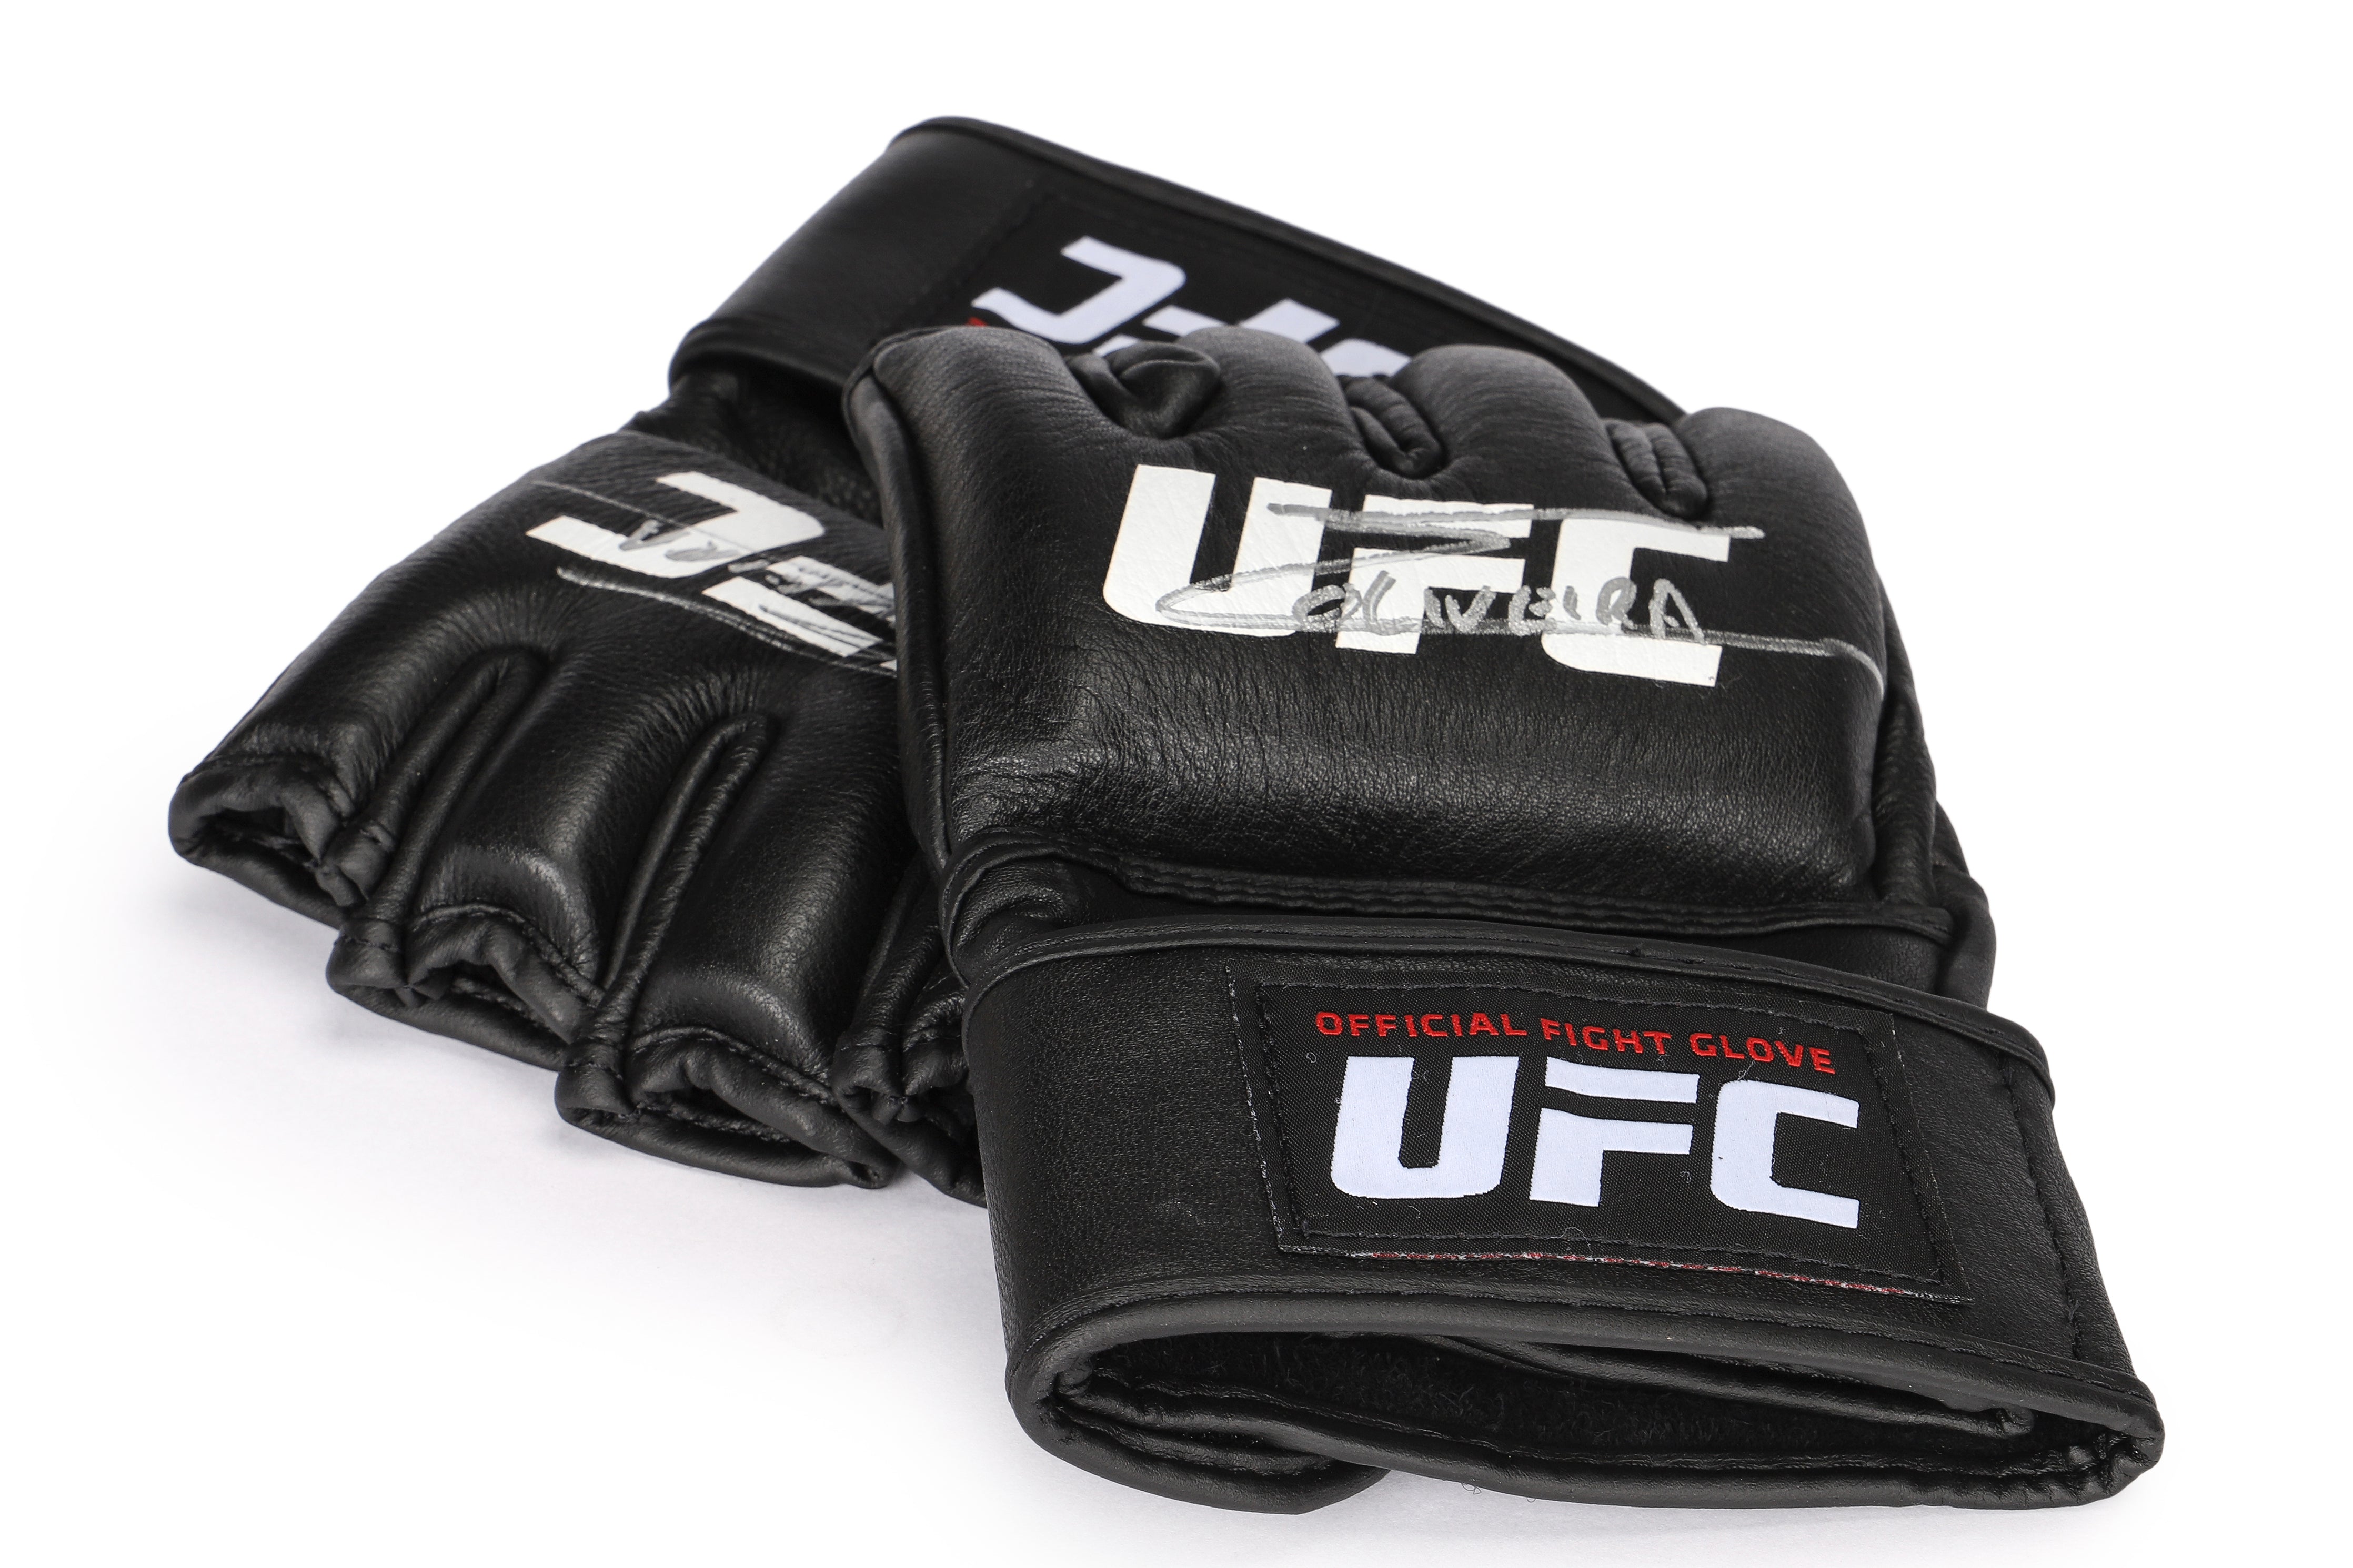 Authentic Charles Oliveira gloves